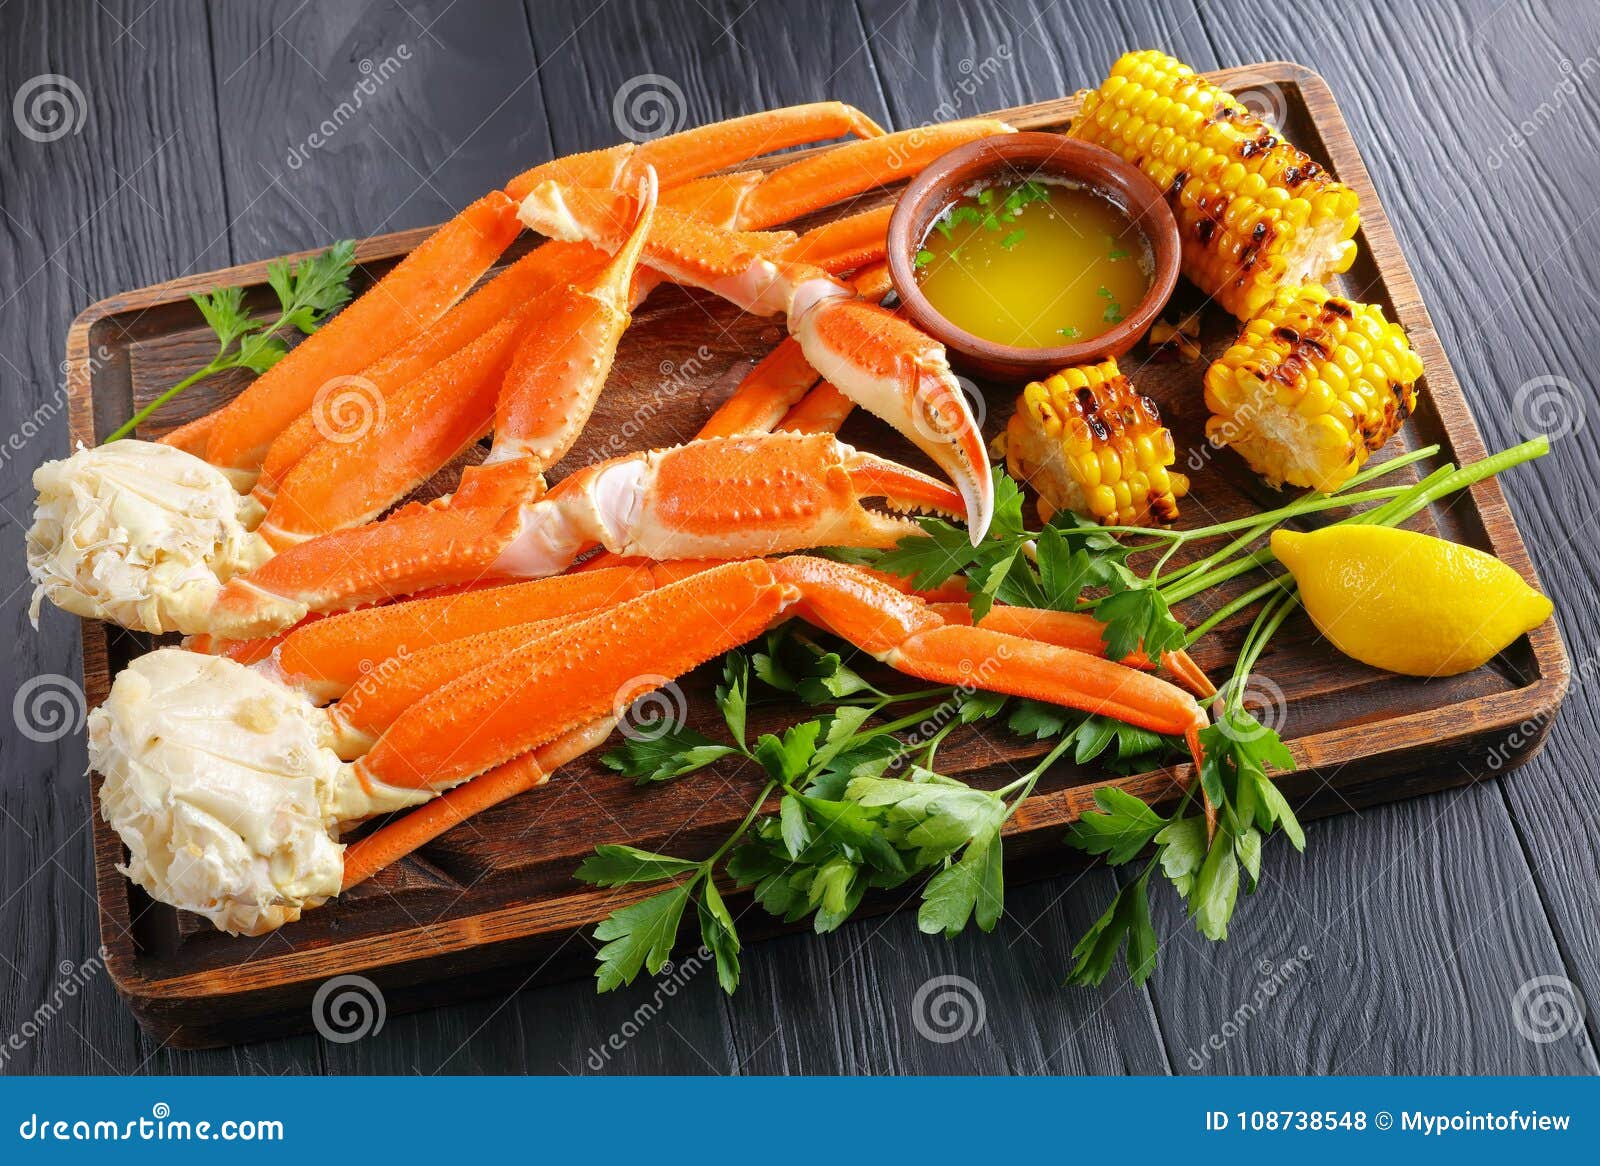 snow crab legs served with corn cobs